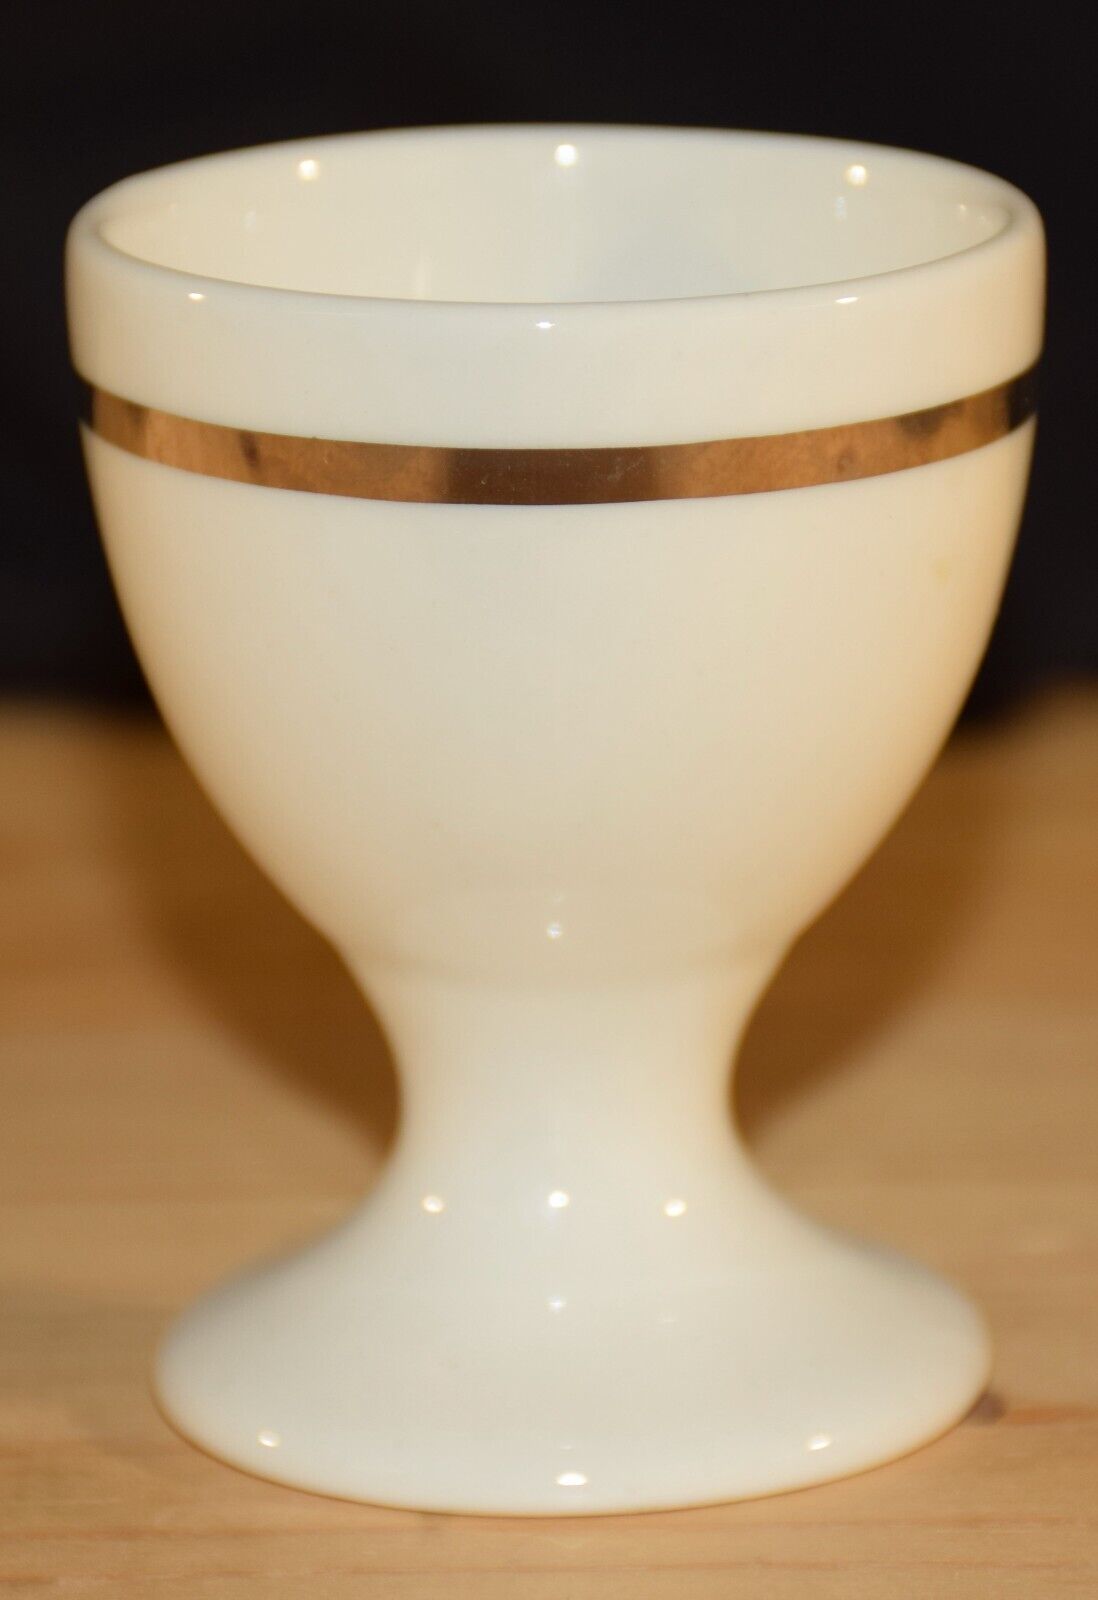 British Airways Egg Cup - Business Class Silver Band Service by Wedgwood